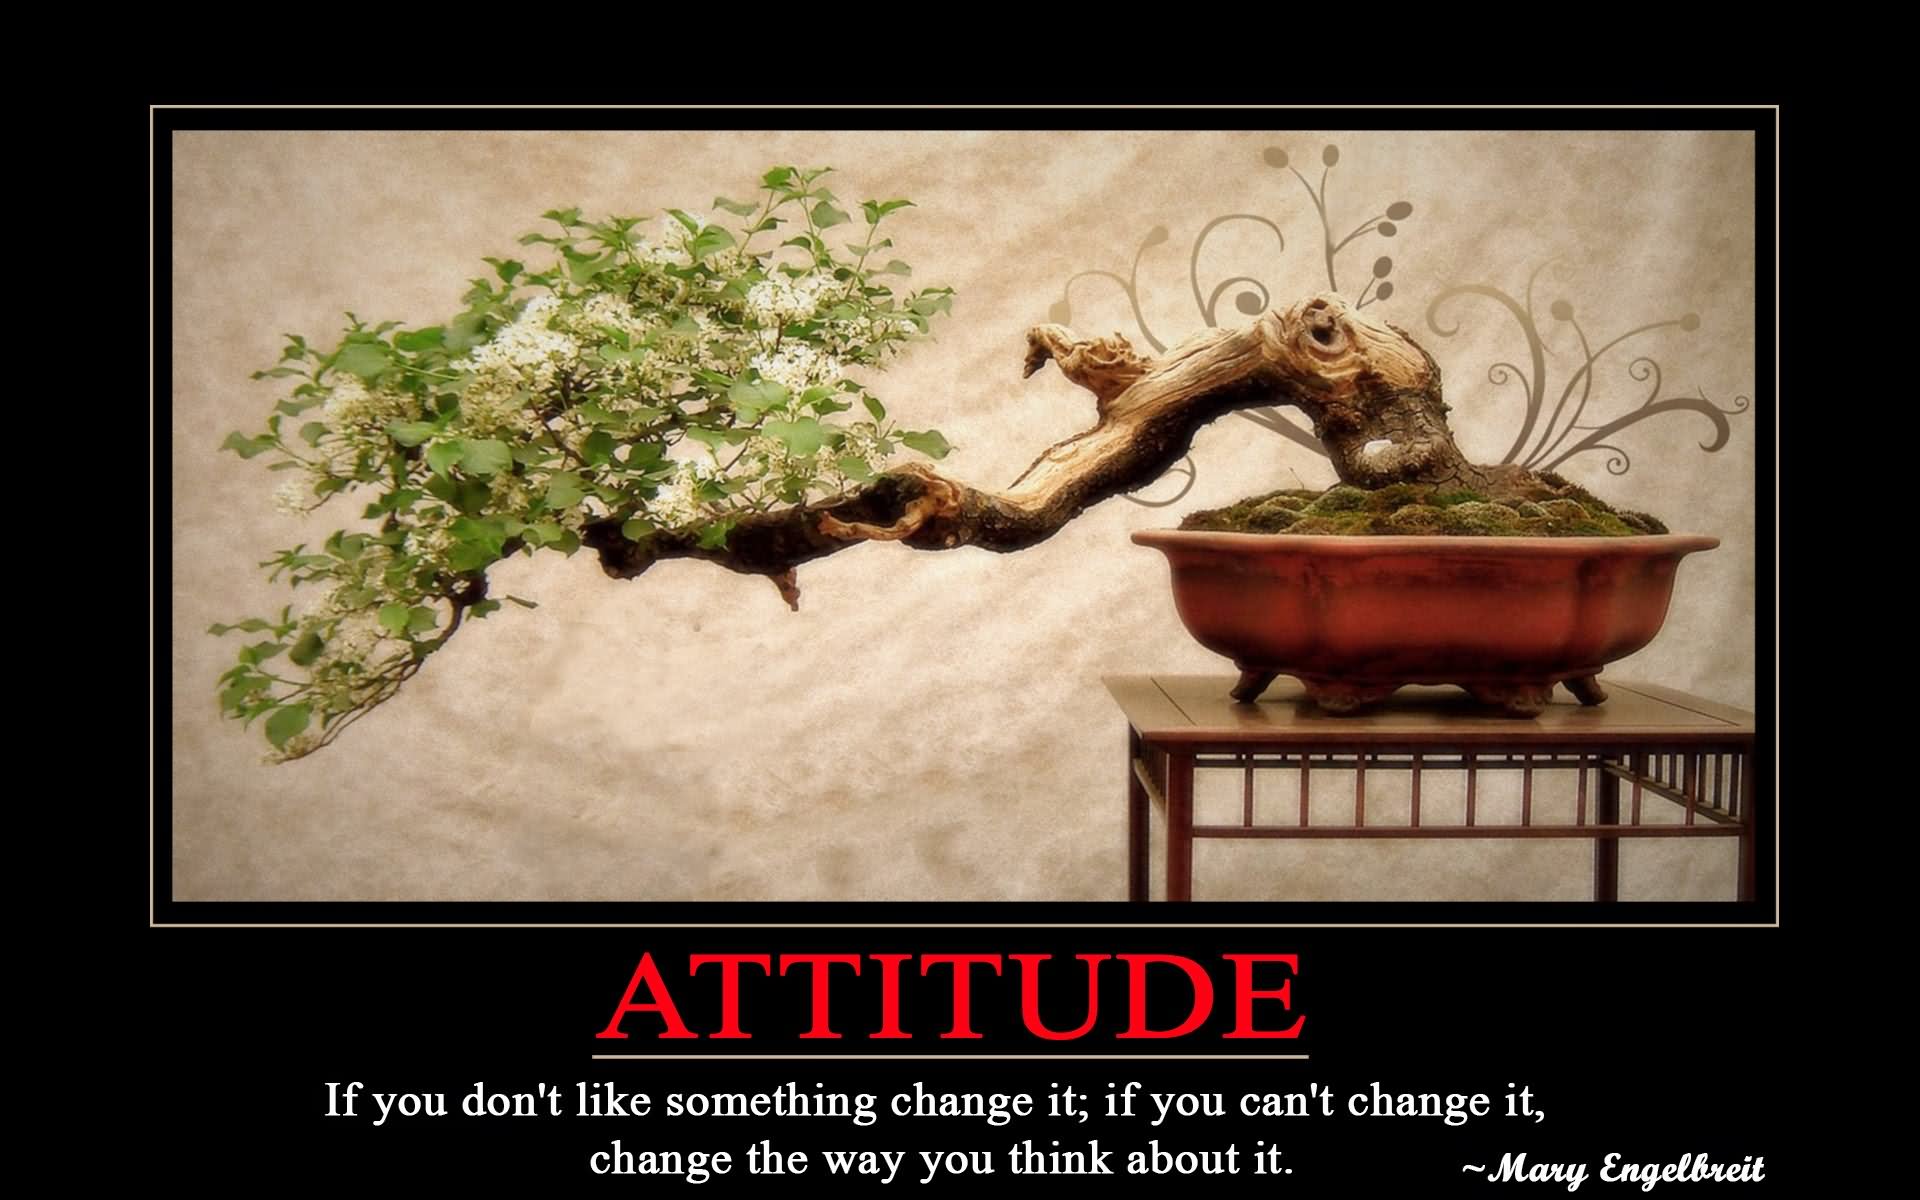 If Don't Change Like Something Change It Funny Attitude Poster